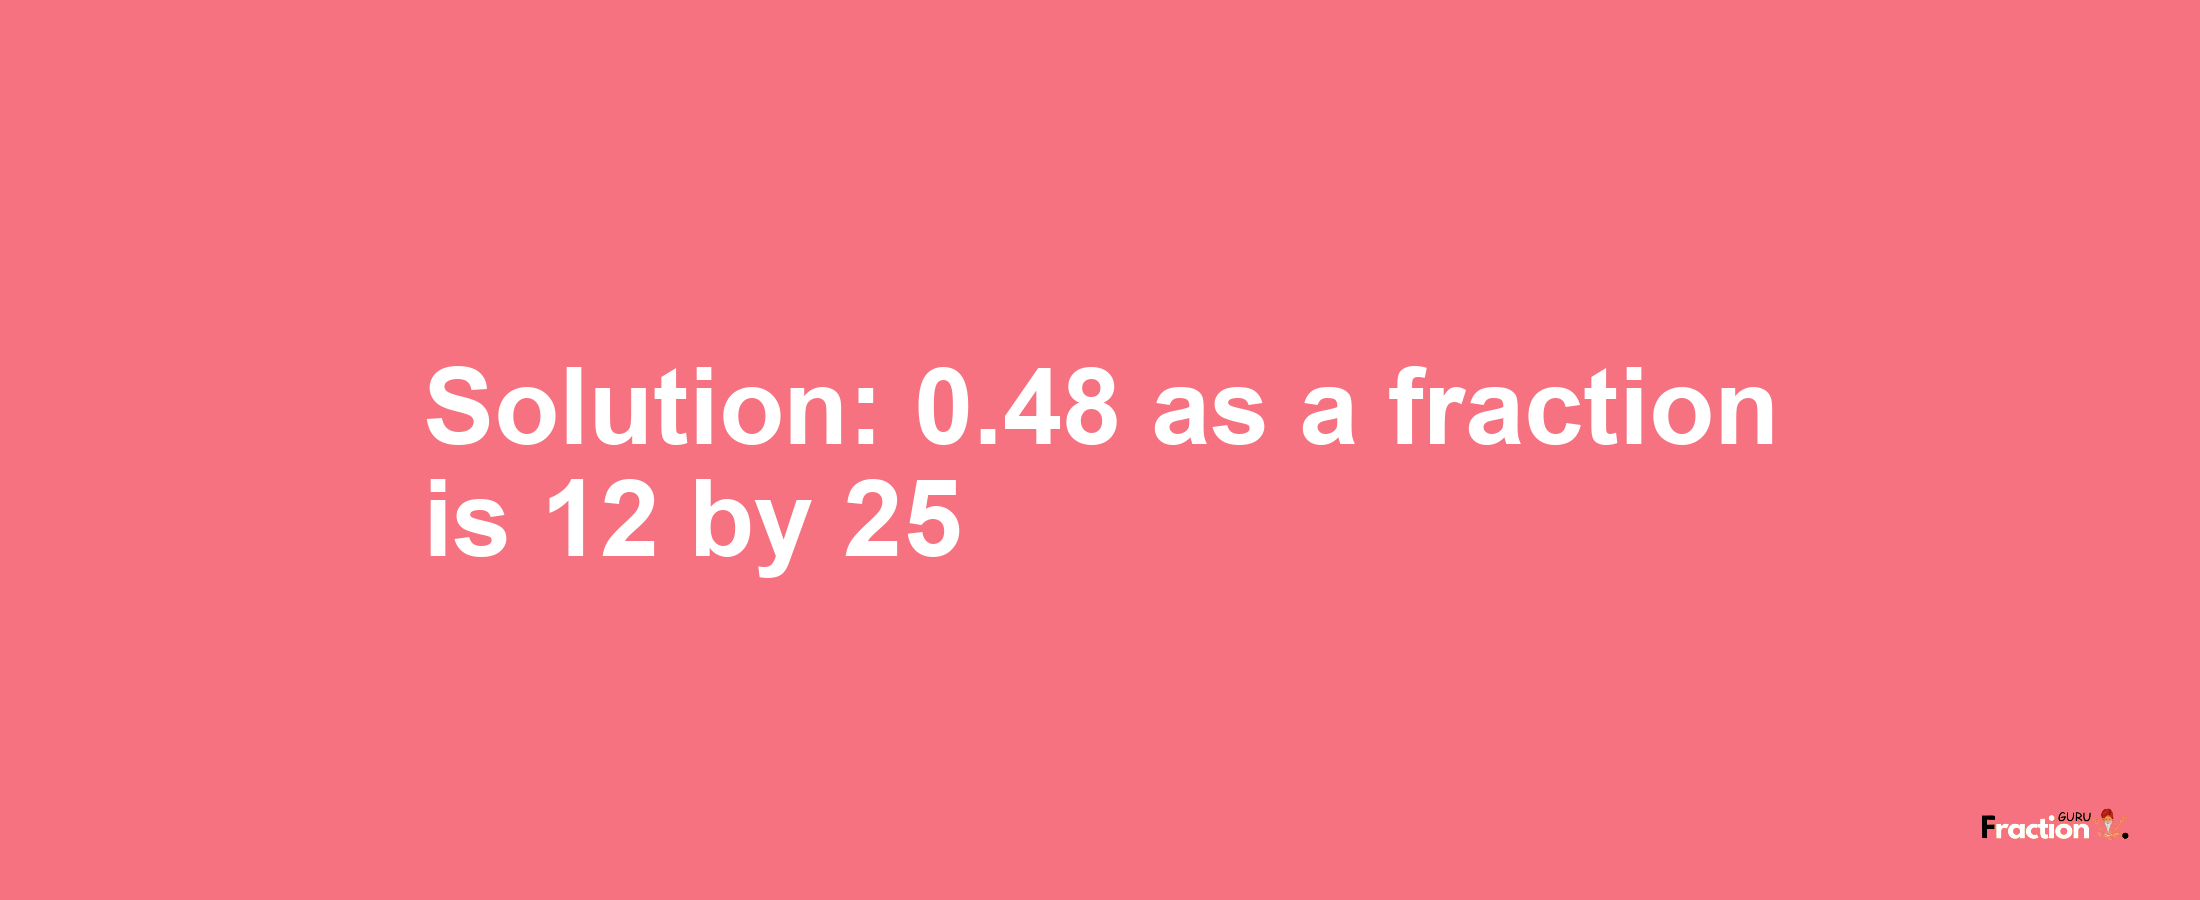 Solution:0.48 as a fraction is 12/25